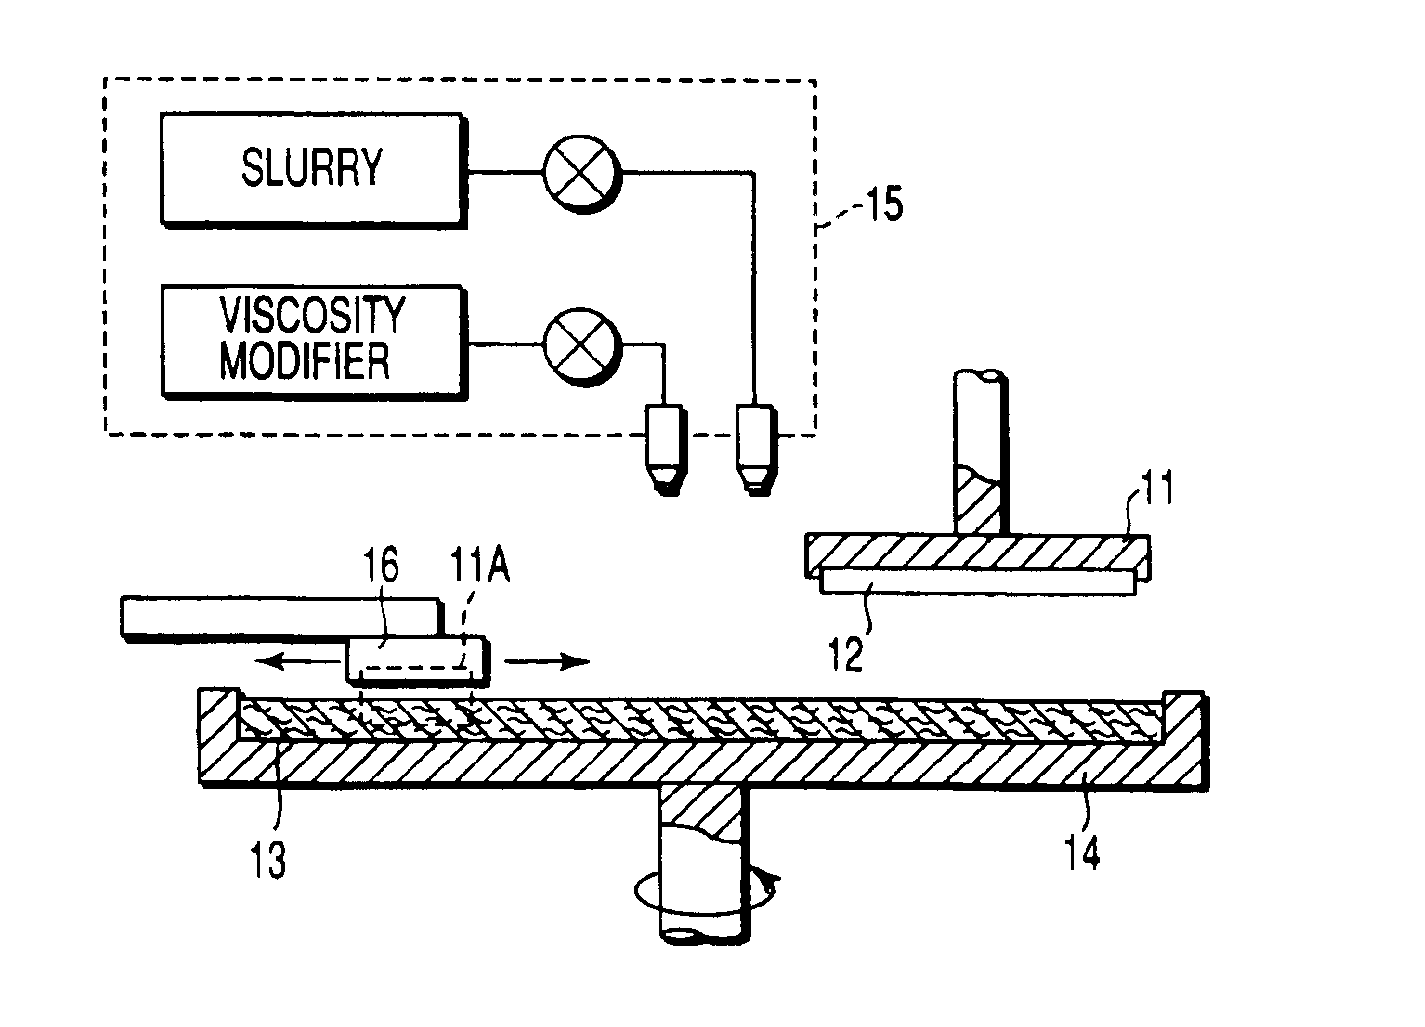 Method of chemical/mechanical polishing of the surface of semiconductor device